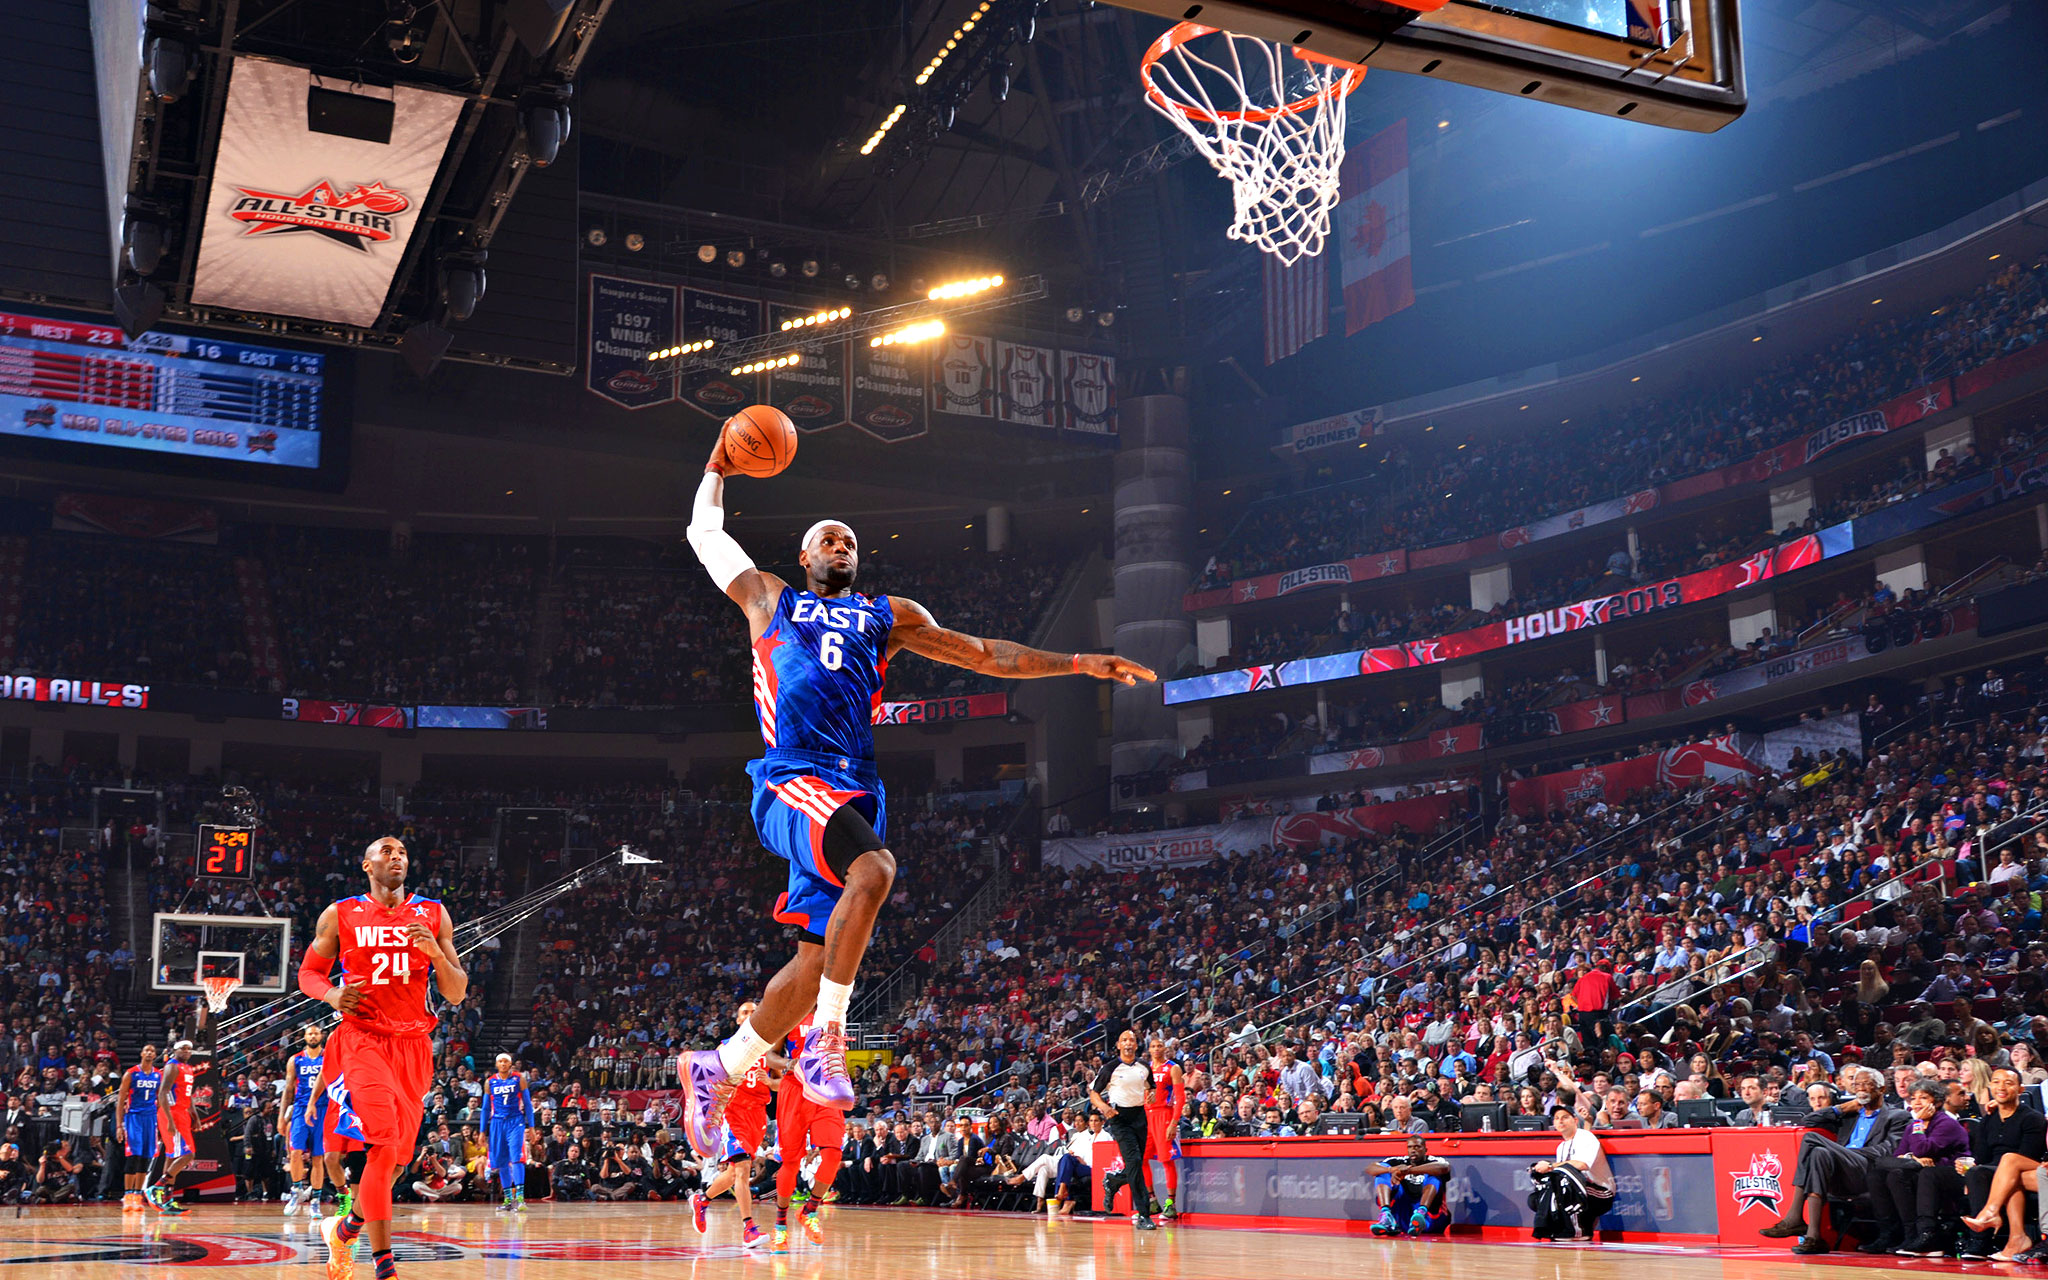 LeBron with the monster breakaway dunk at the 2013 All-Star Game with Kobe trailing ...2048 x 1280